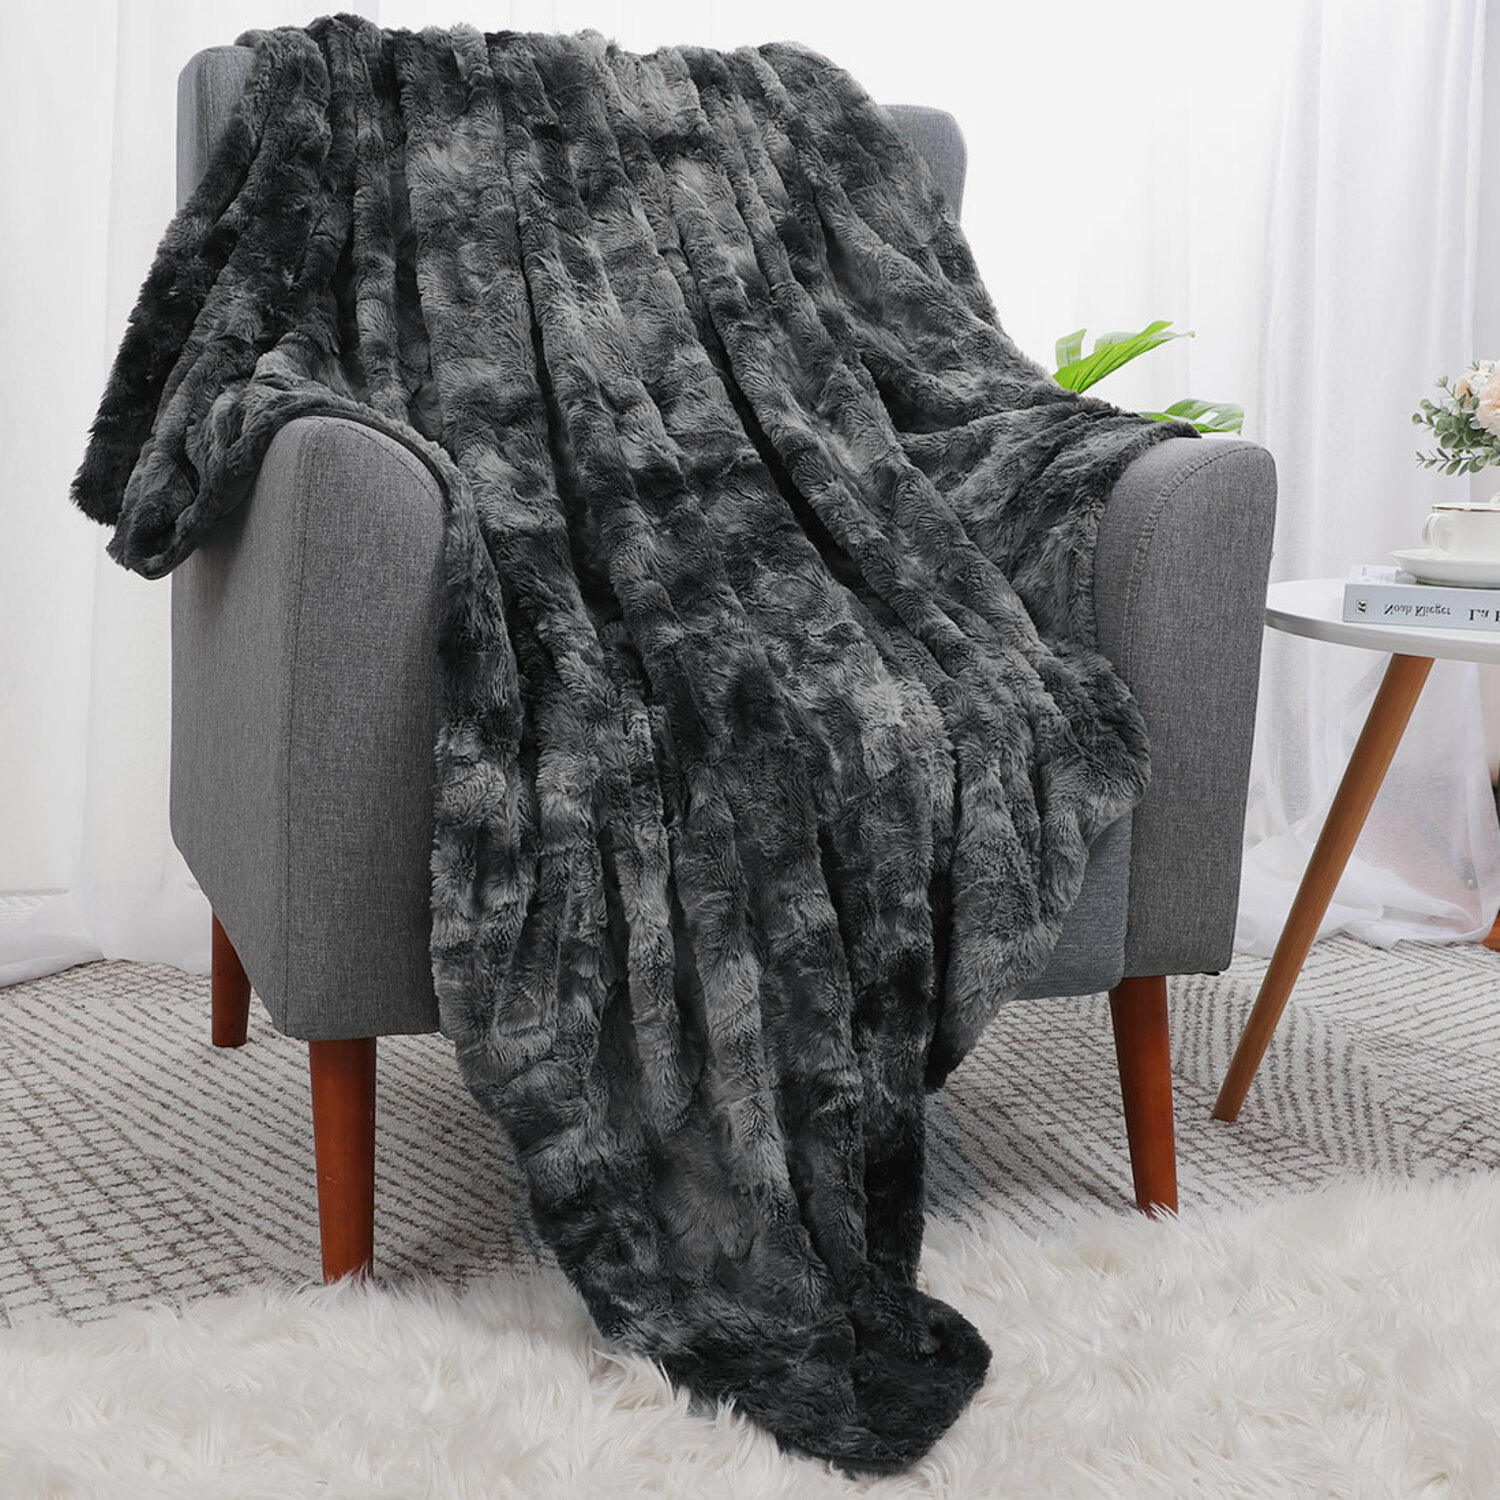 PiccoCasa Double Sided Faux Fur Blanket 50"x60" Long Shaggy Throw Blanket, Black - image 2 of 6